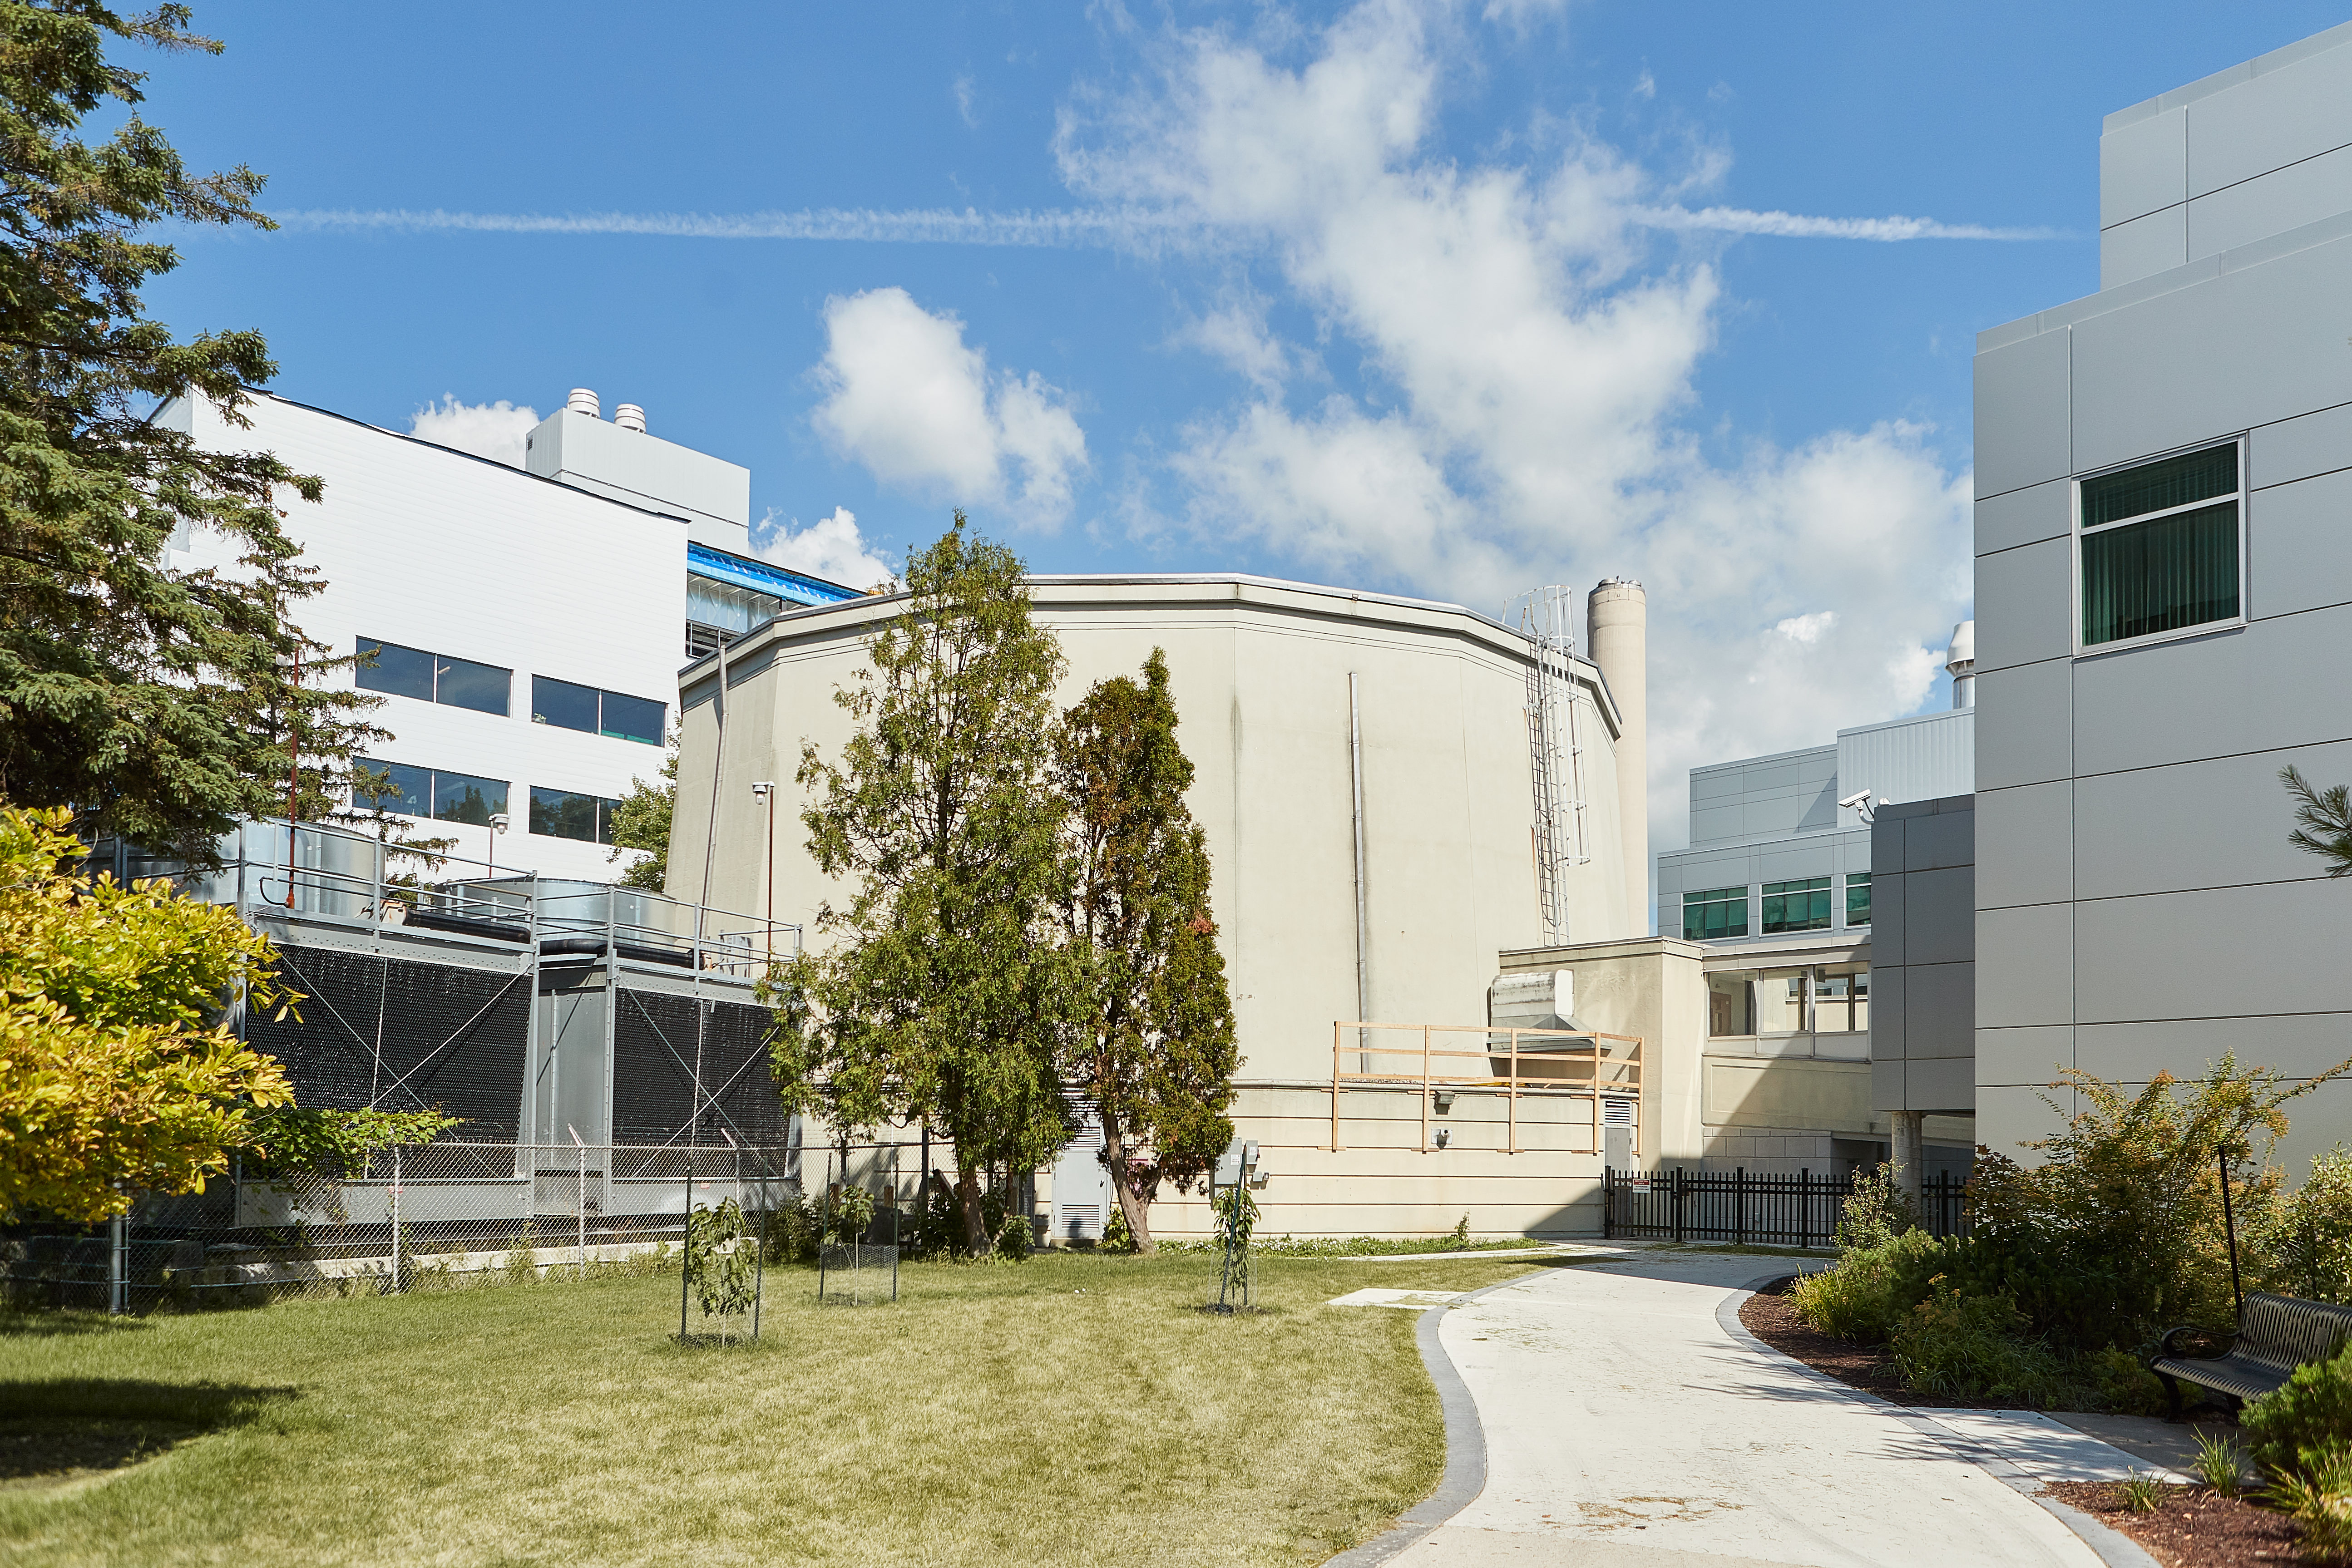 Exterior of McMaster Nuclear Reactor.